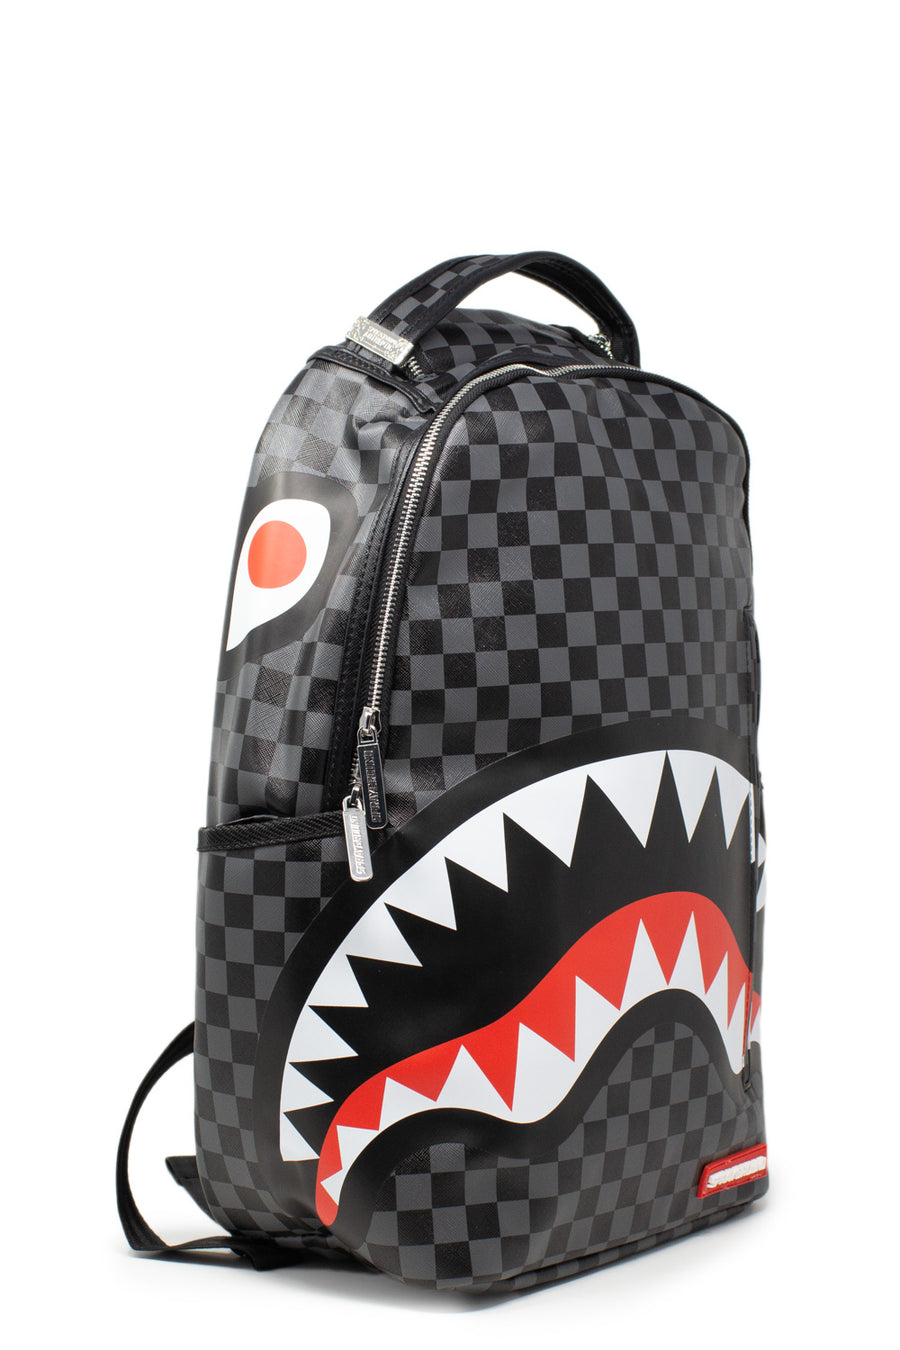 Sprayground Sharks in Paris black leather checker backpack for